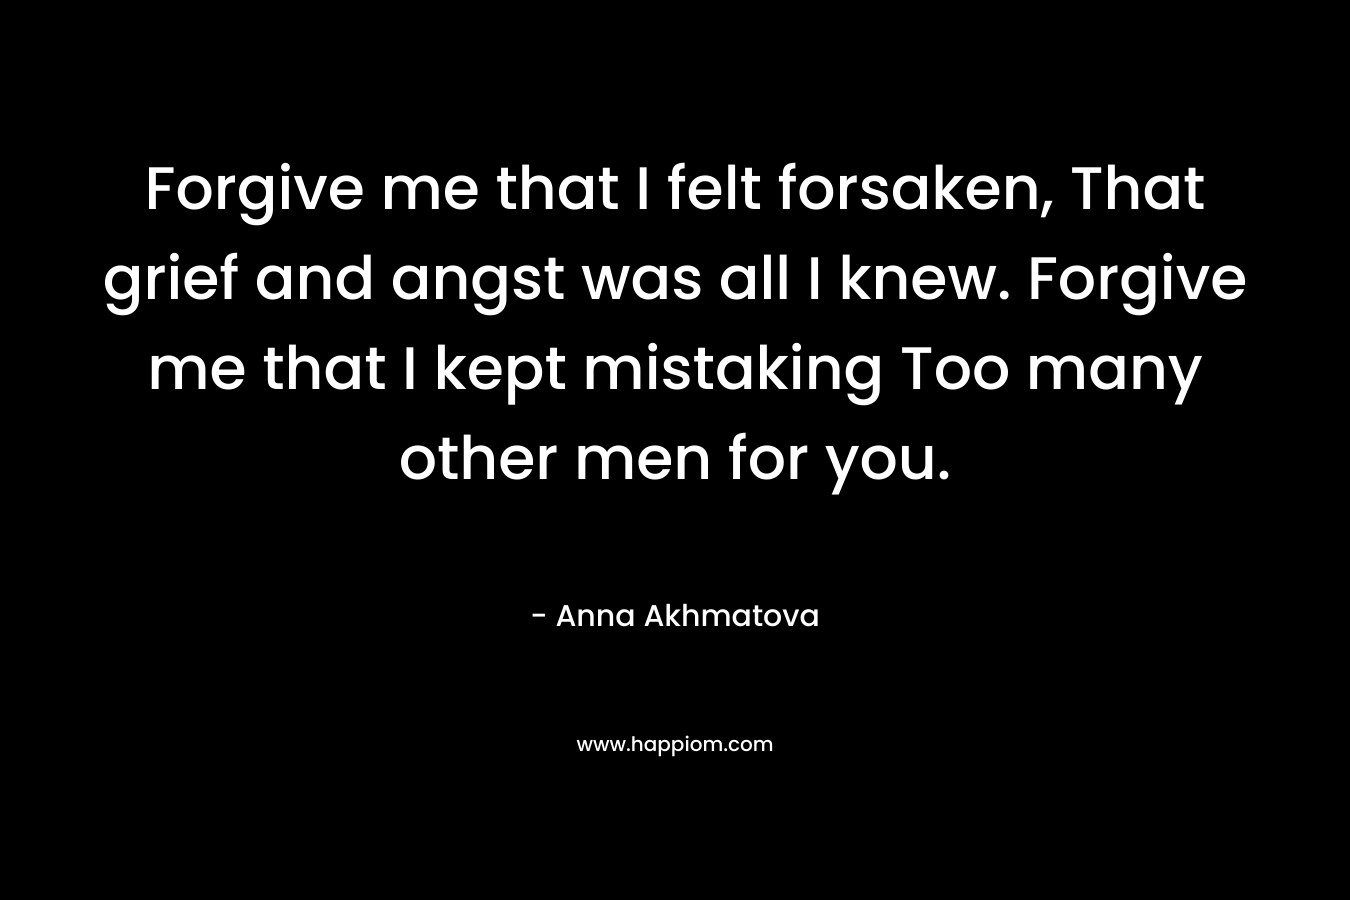 Forgive me that I felt forsaken, That grief and angst was all I knew. Forgive me that I kept mistaking Too many other men for you.